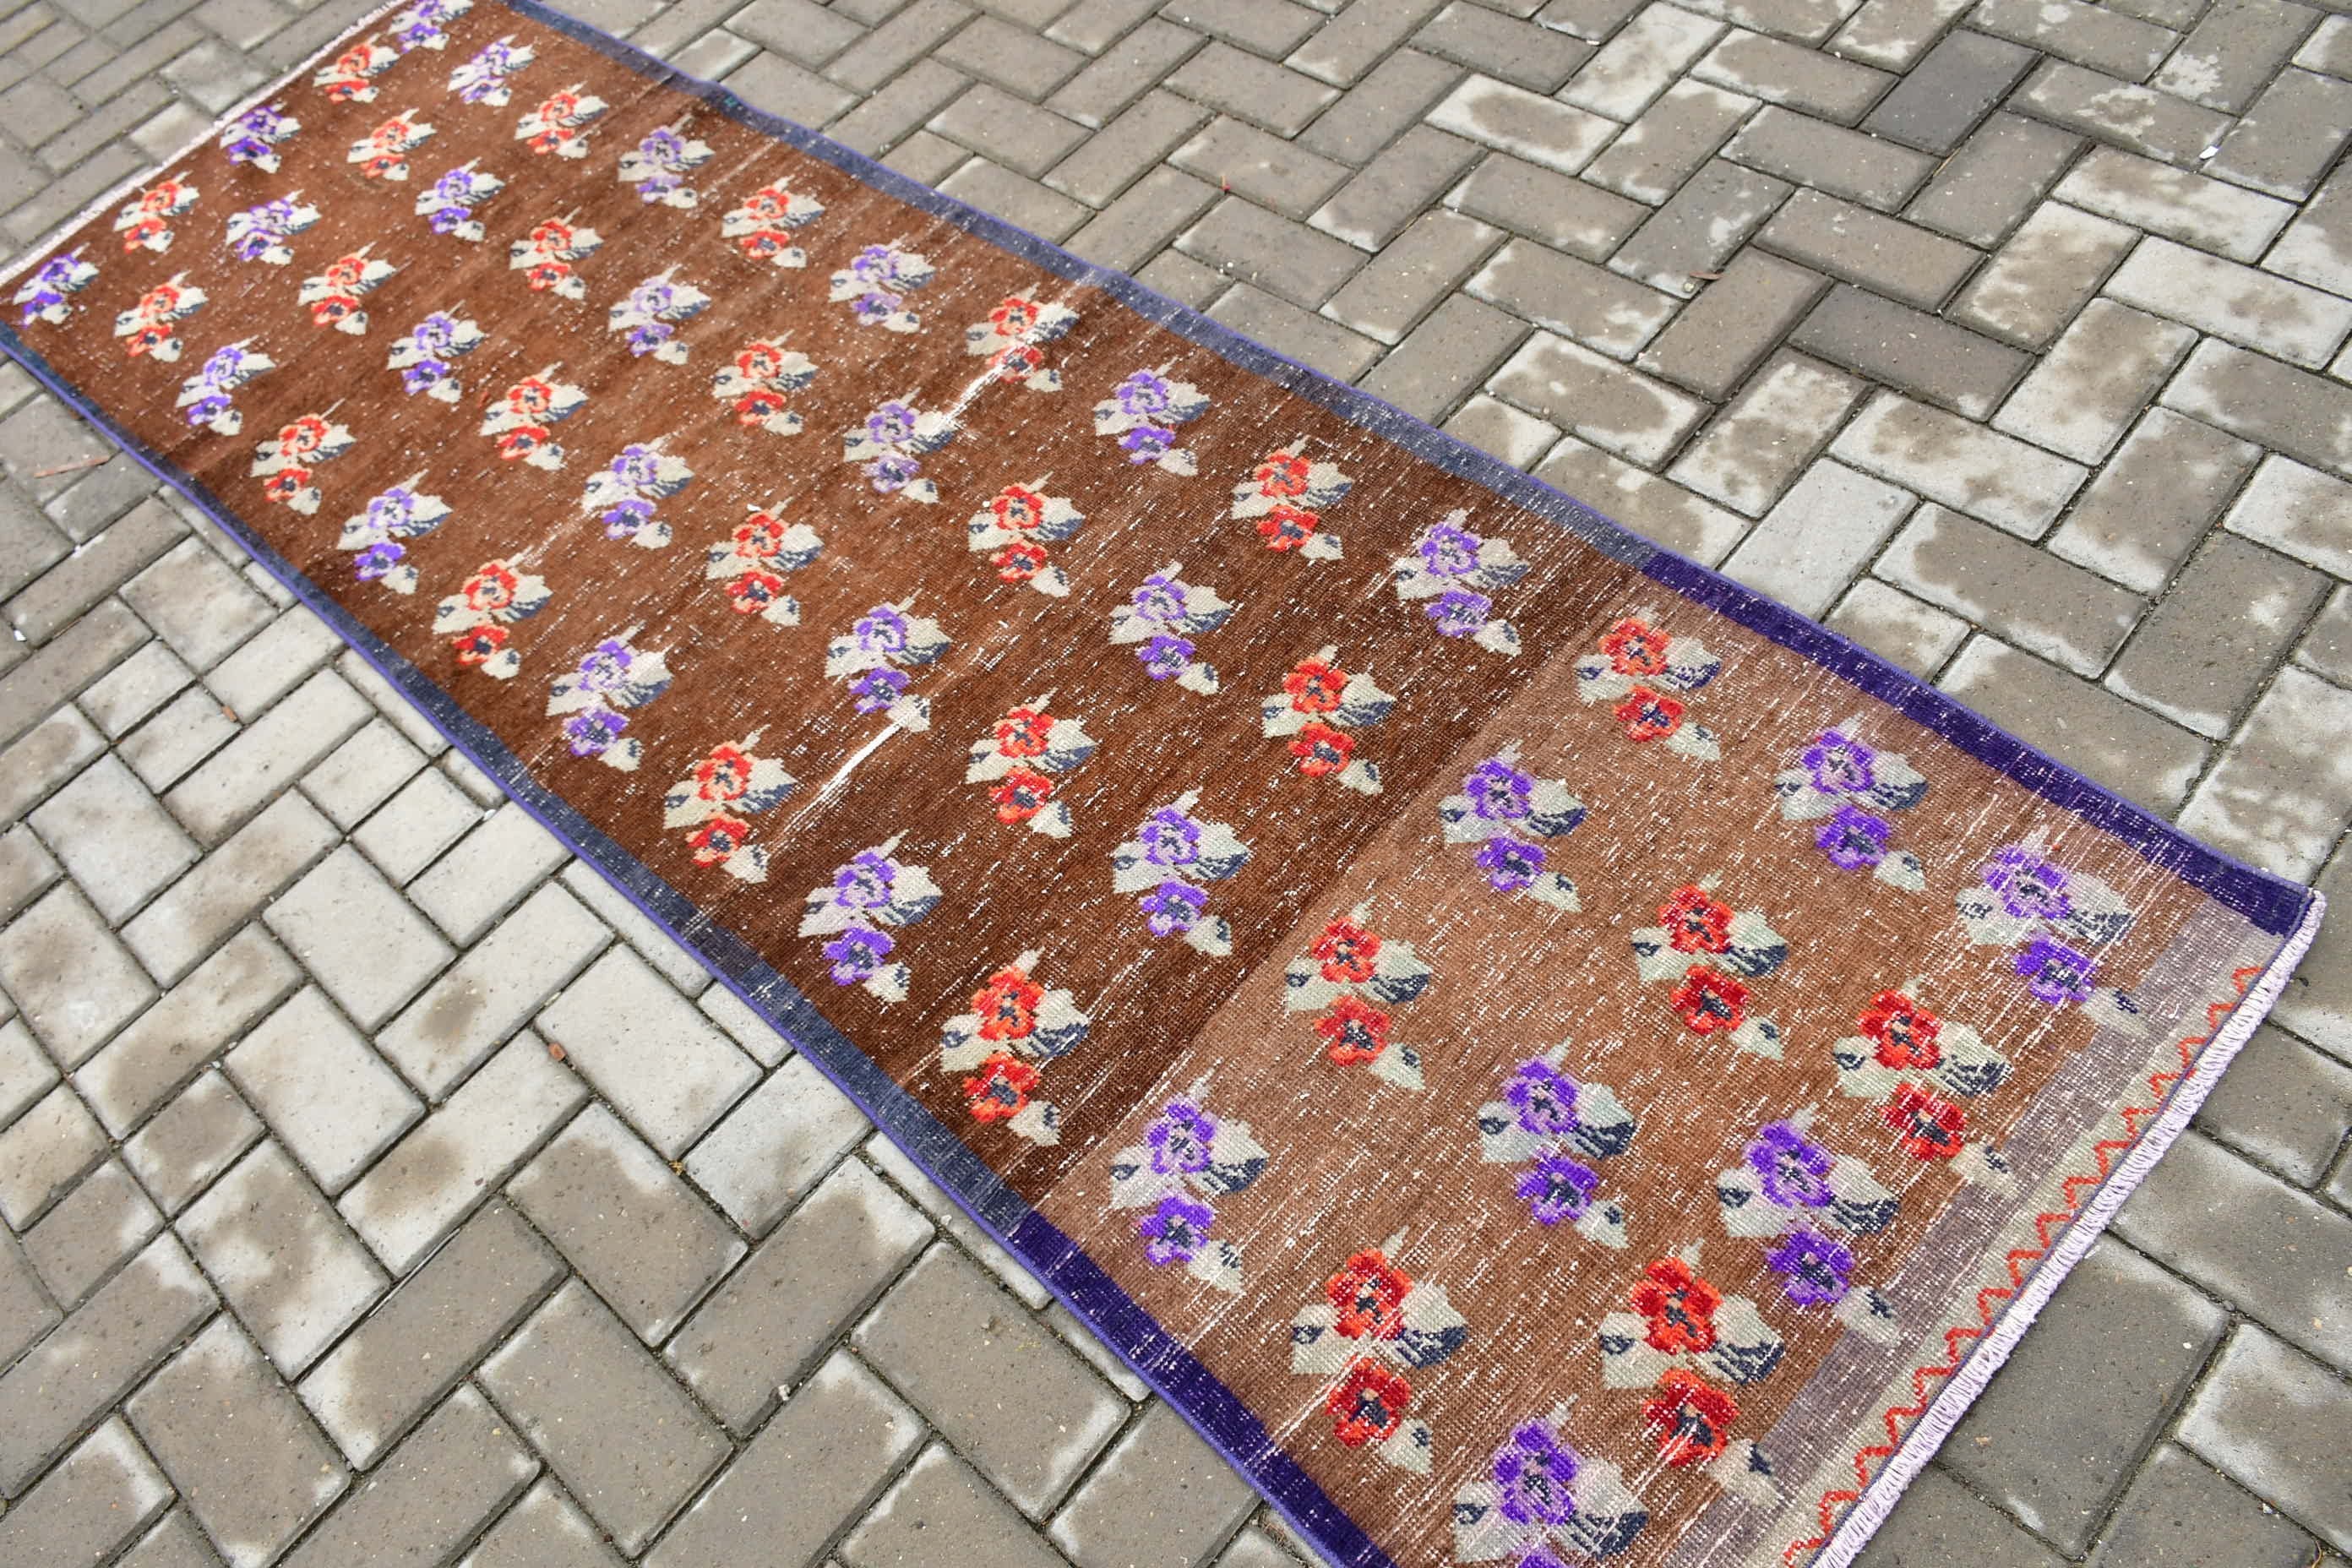 Retro Rug, Home Decor Rugs, Rugs for Stair, Kitchen Rugs, Antique Rugs, Turkish Rug, Brown Oushak Rug, 2.7x8.1 ft Runner Rugs, Vintage Rug